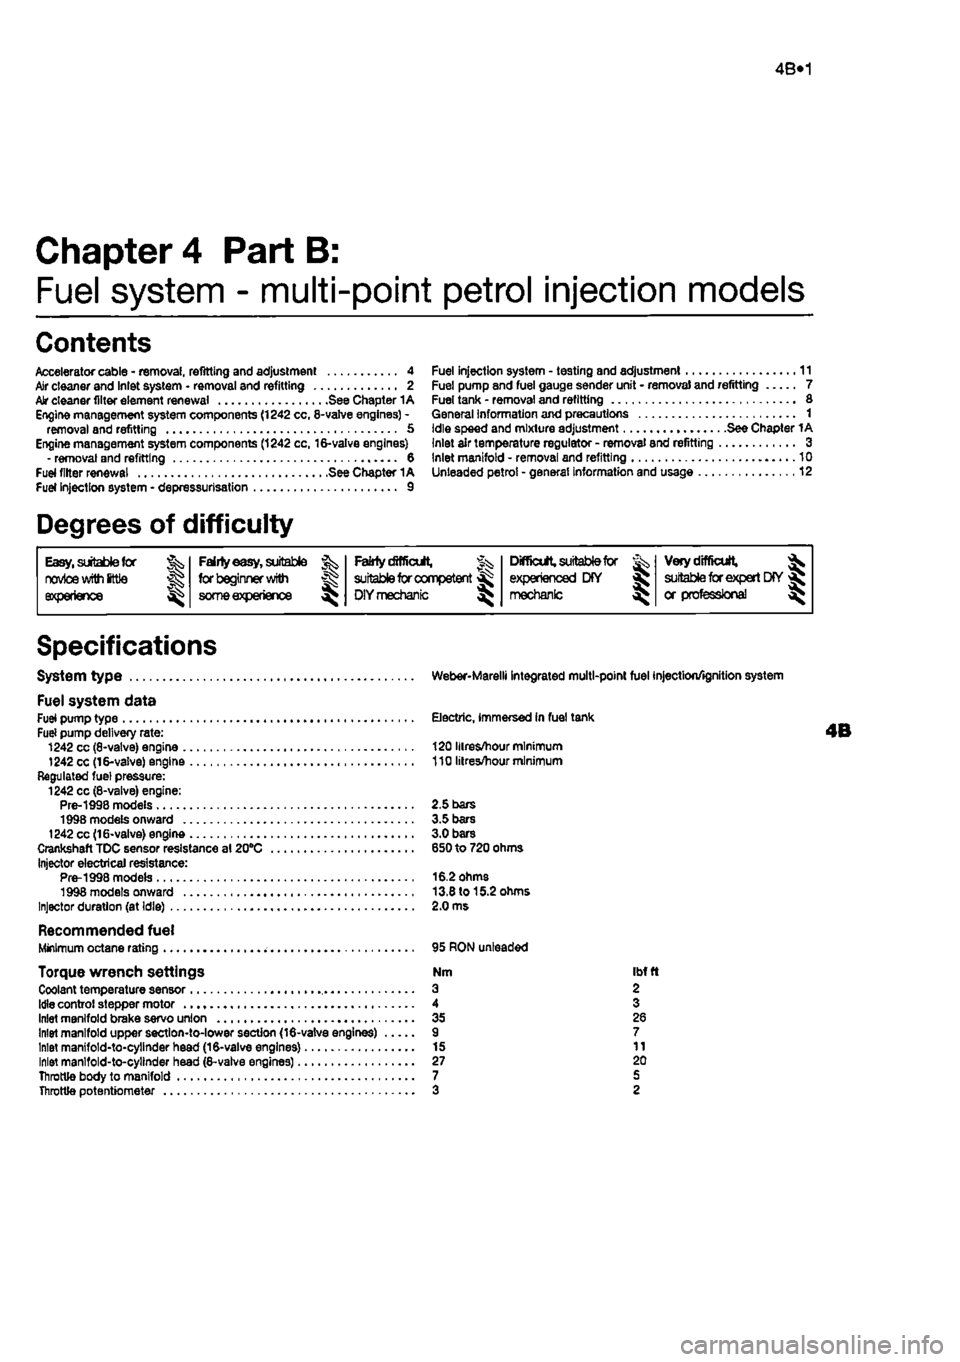 FIAT PUNTO 1997 176 / 1.G Workshop Manual 
4B*1 
Chapter 4 Part B: 
Fuel system - multi-point petrol injection models 
Contents 
Accelerator cable - removal, refitting and adjustment 4 Air cleaner and Inlet system • removal and refitting 2 